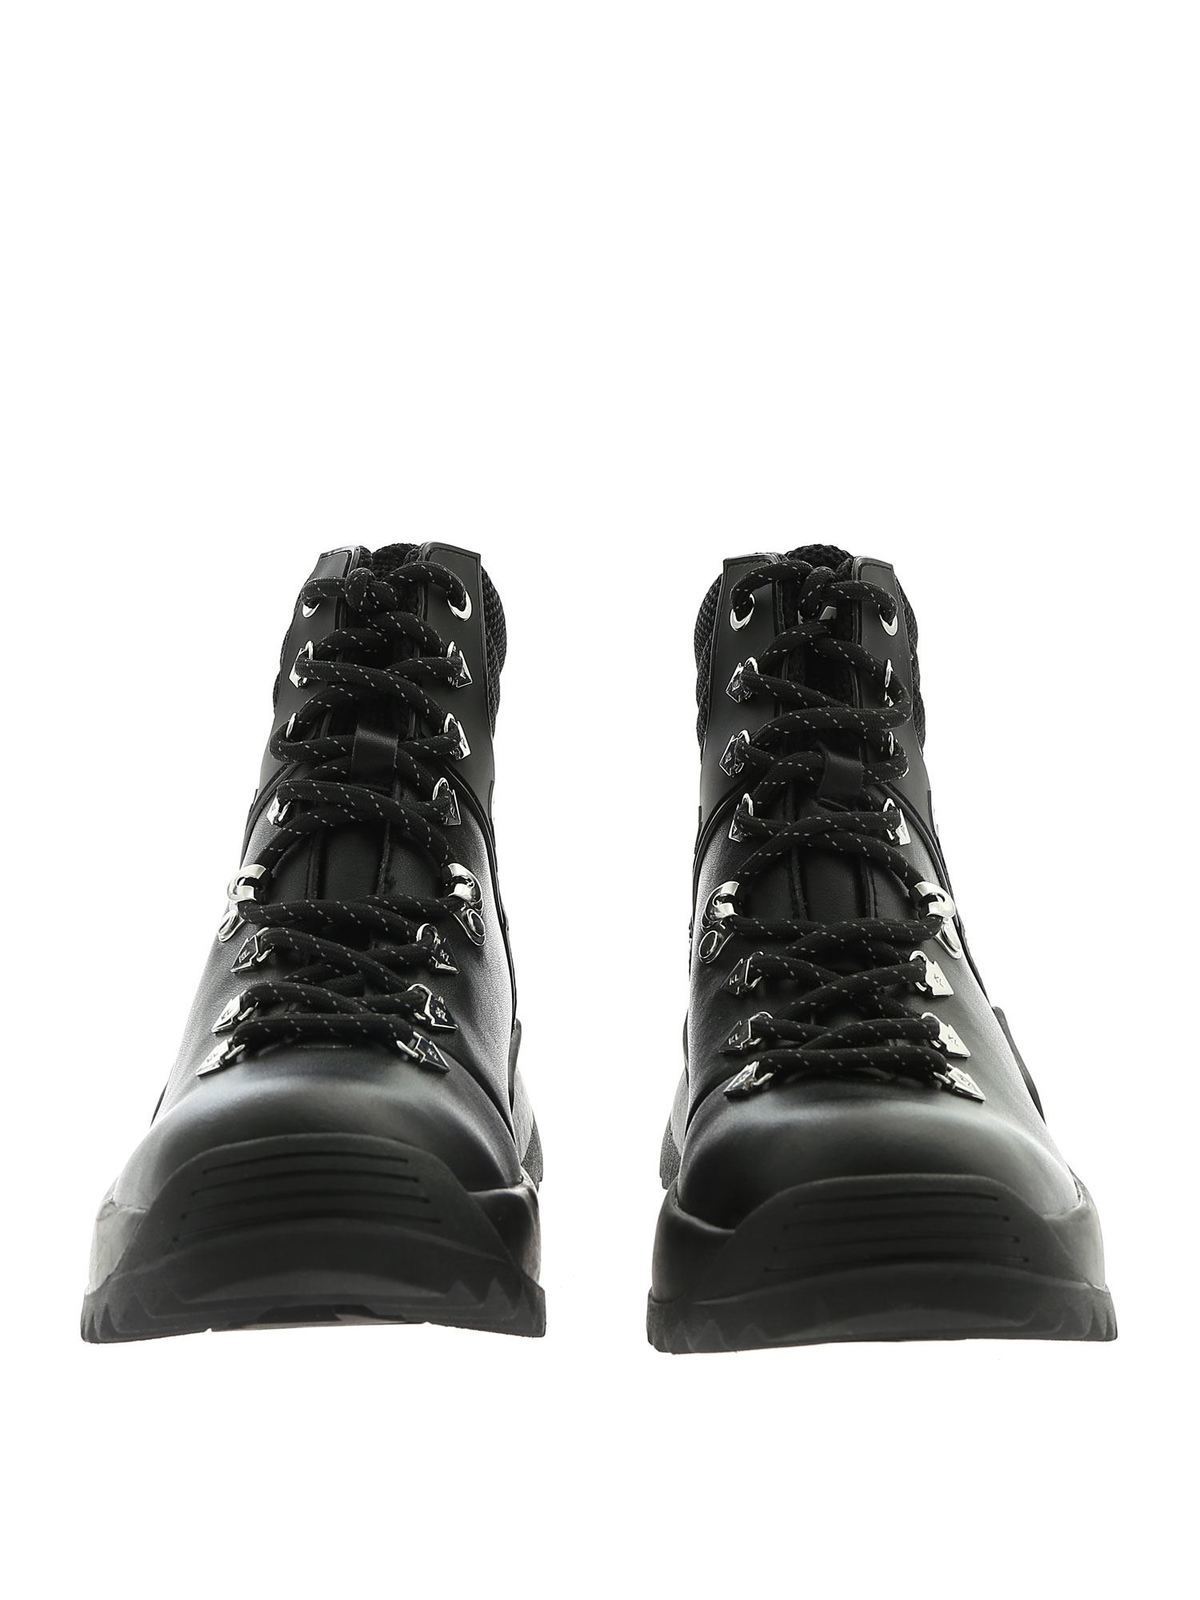 karl lagerfeld ankle boots